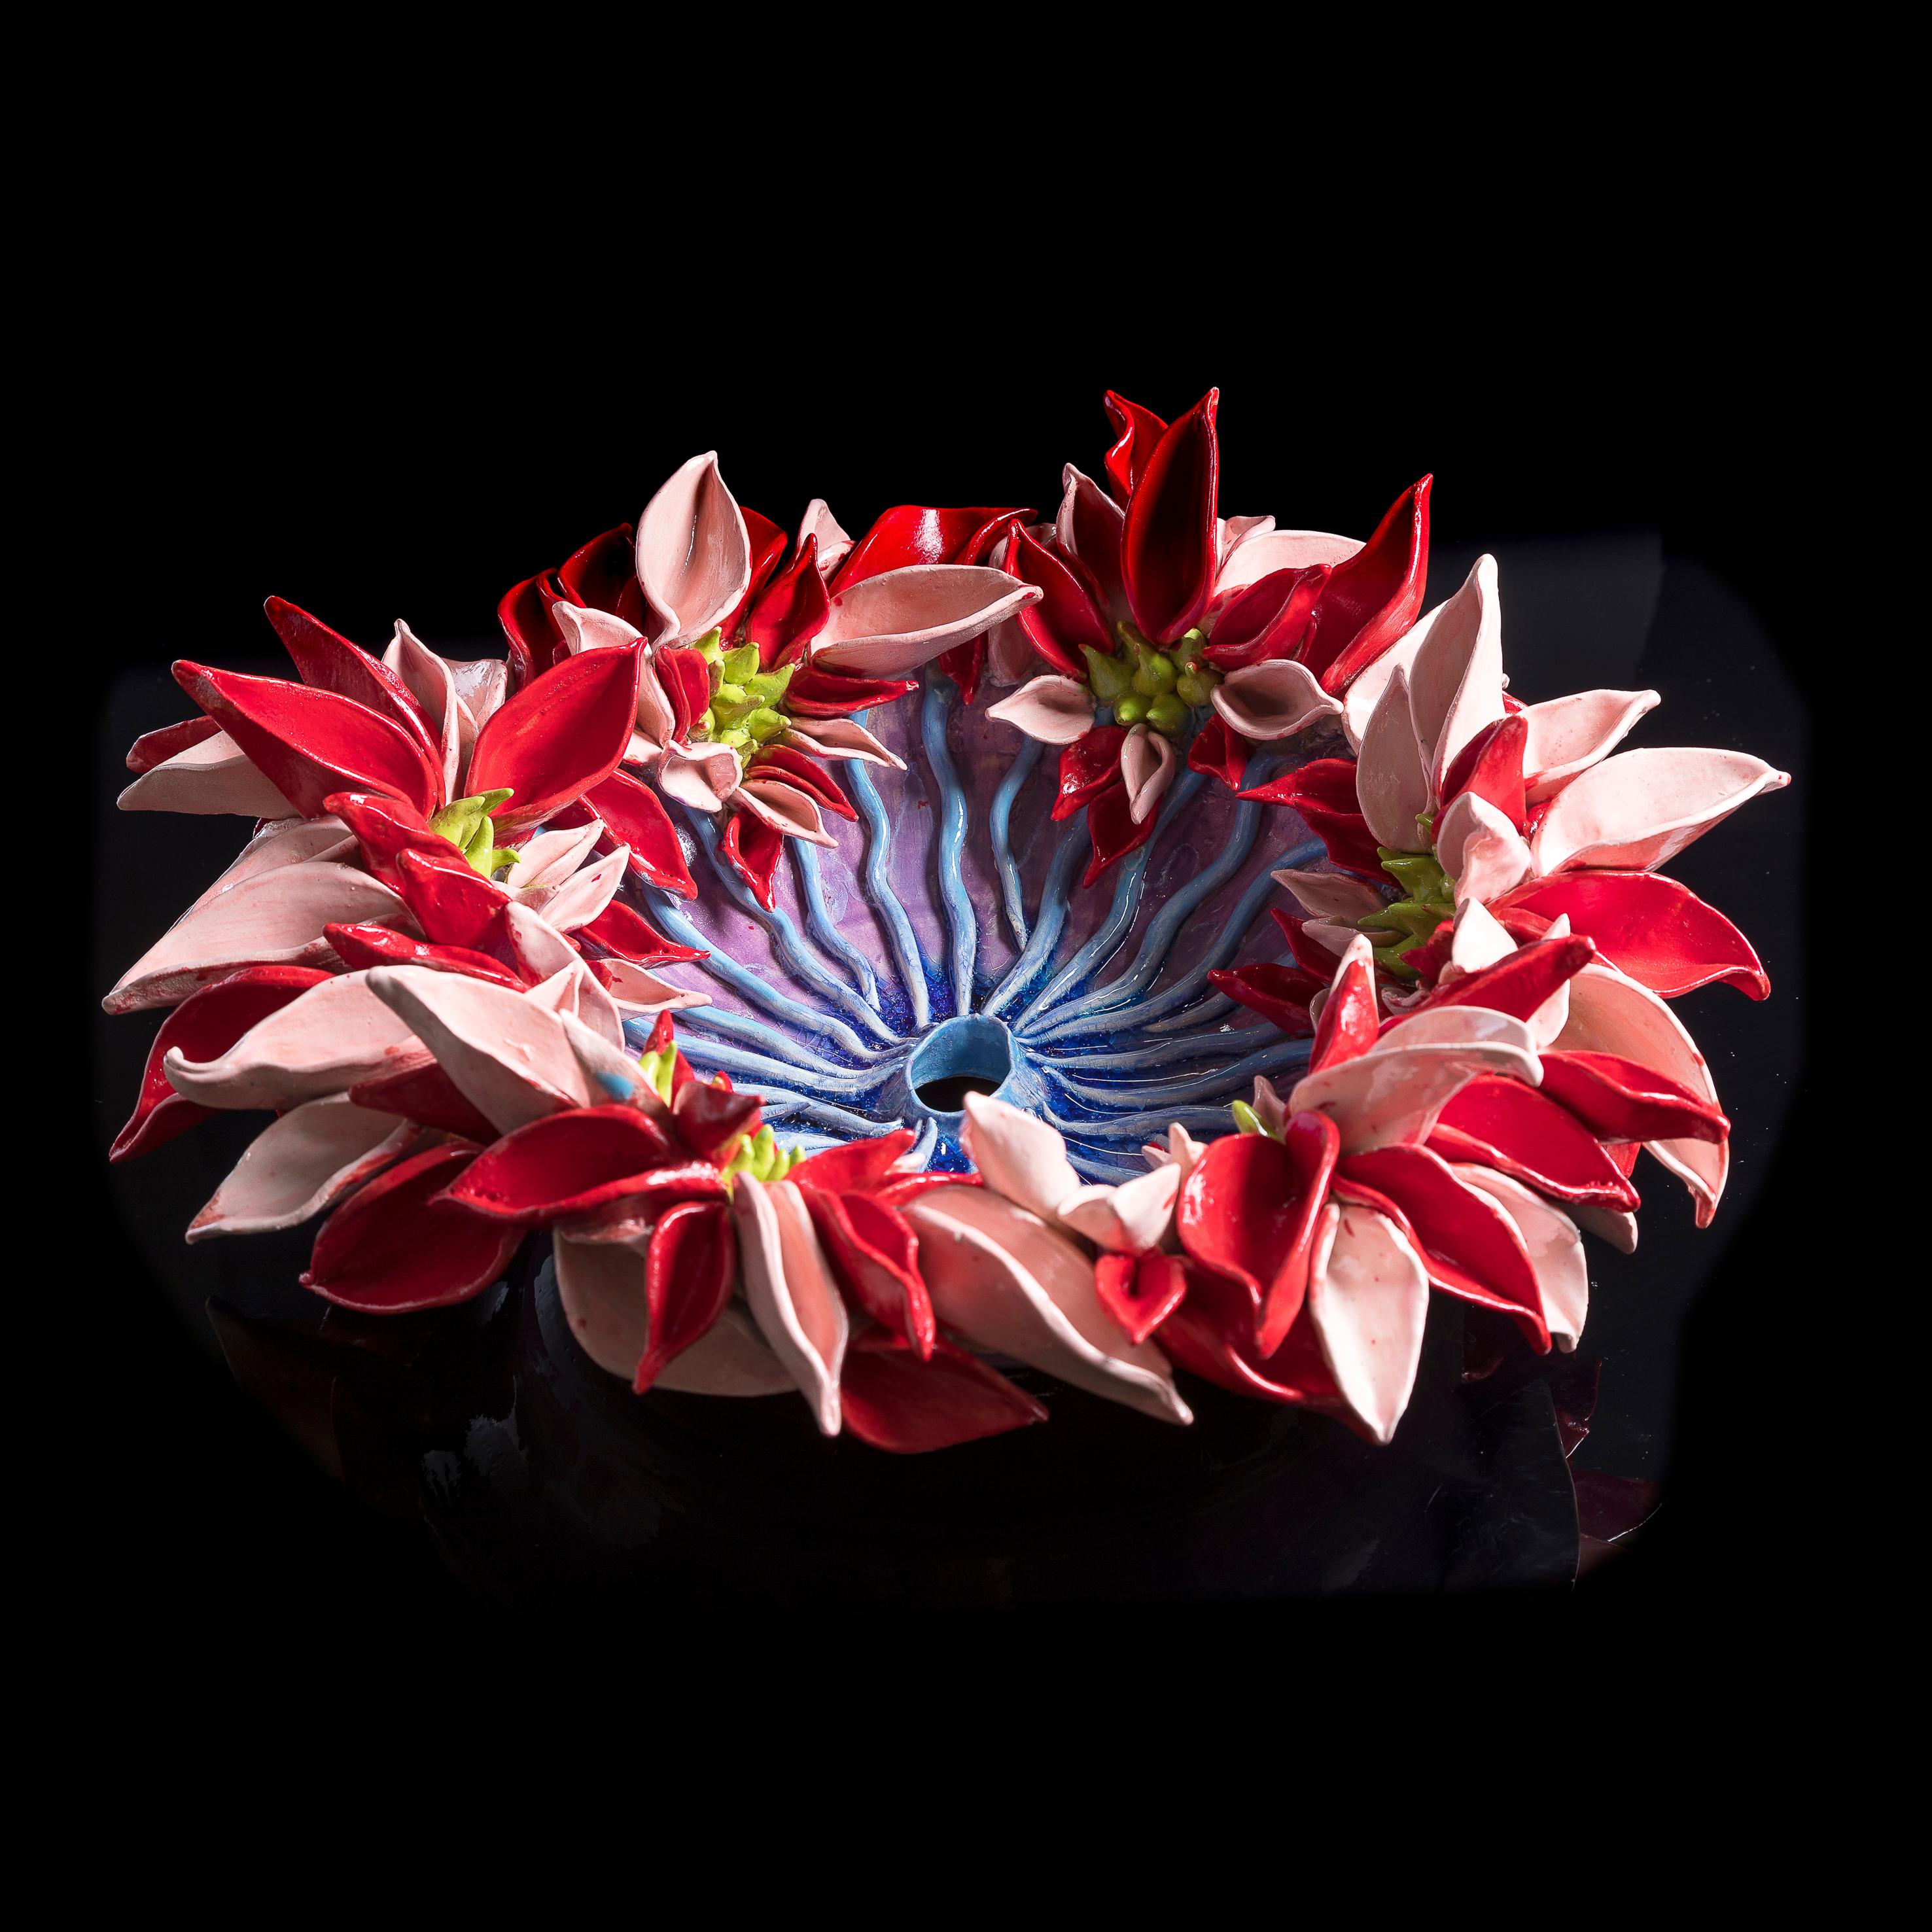 Pink and Red Flower Anemone 2 - inspired from flowers and plants, red, white 